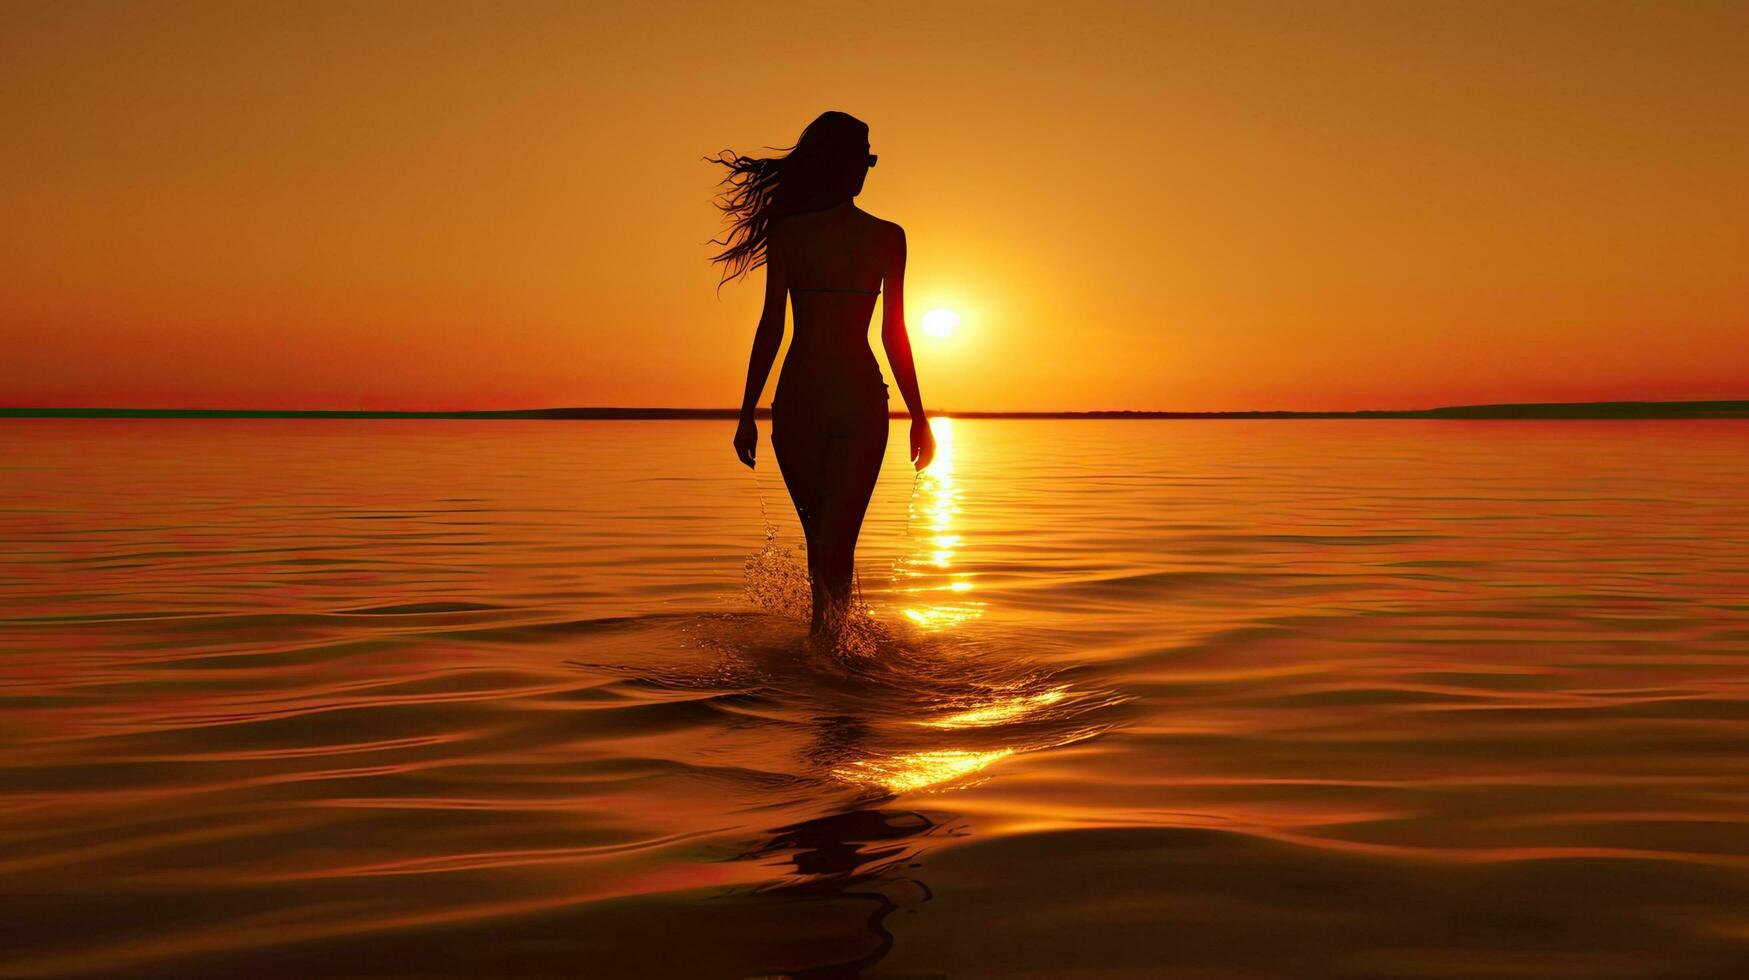 One woman walking on the beach at sunset photo